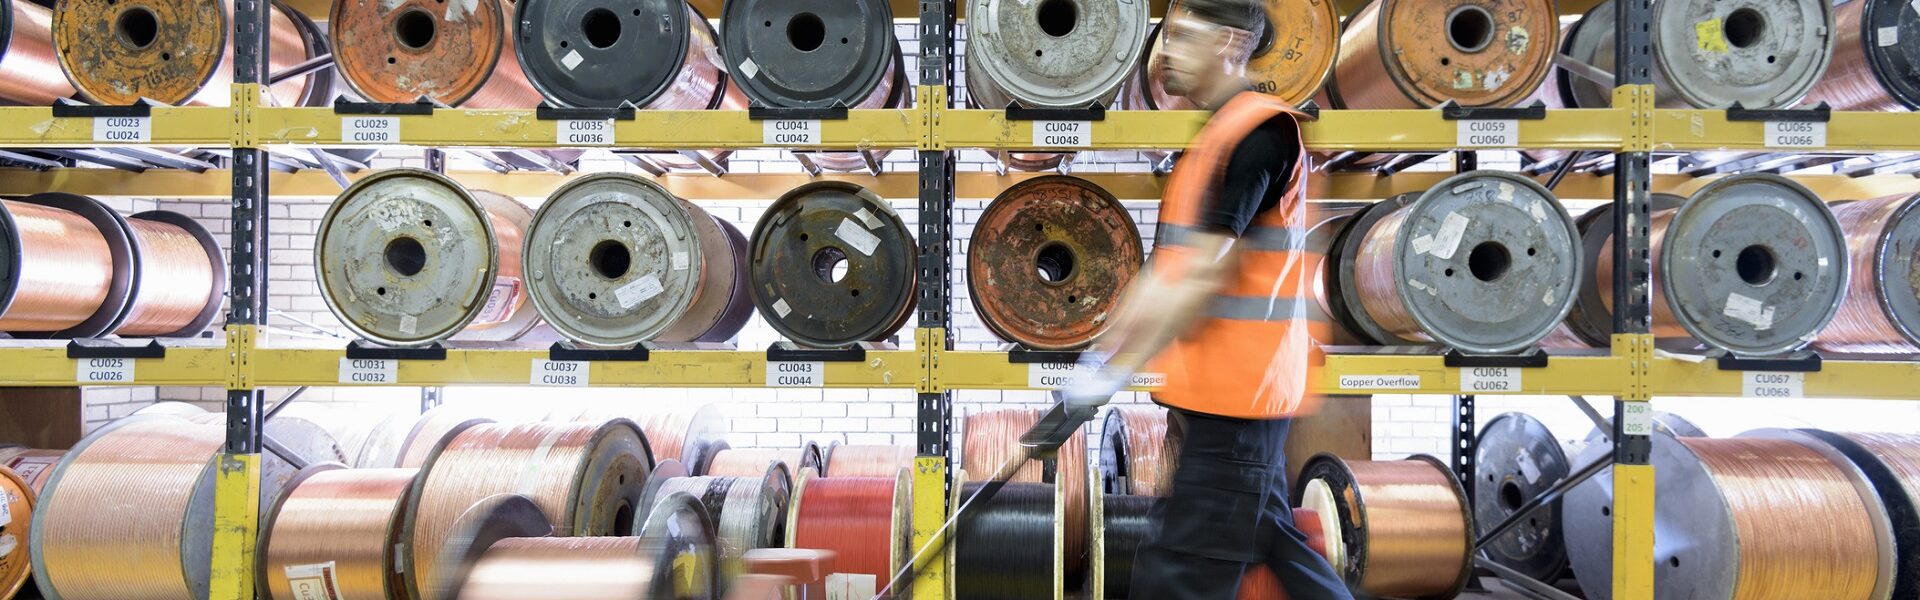 Online Metals Disrupts the Manufacturing Industry and Expands Business with SAP Commerce Cloud